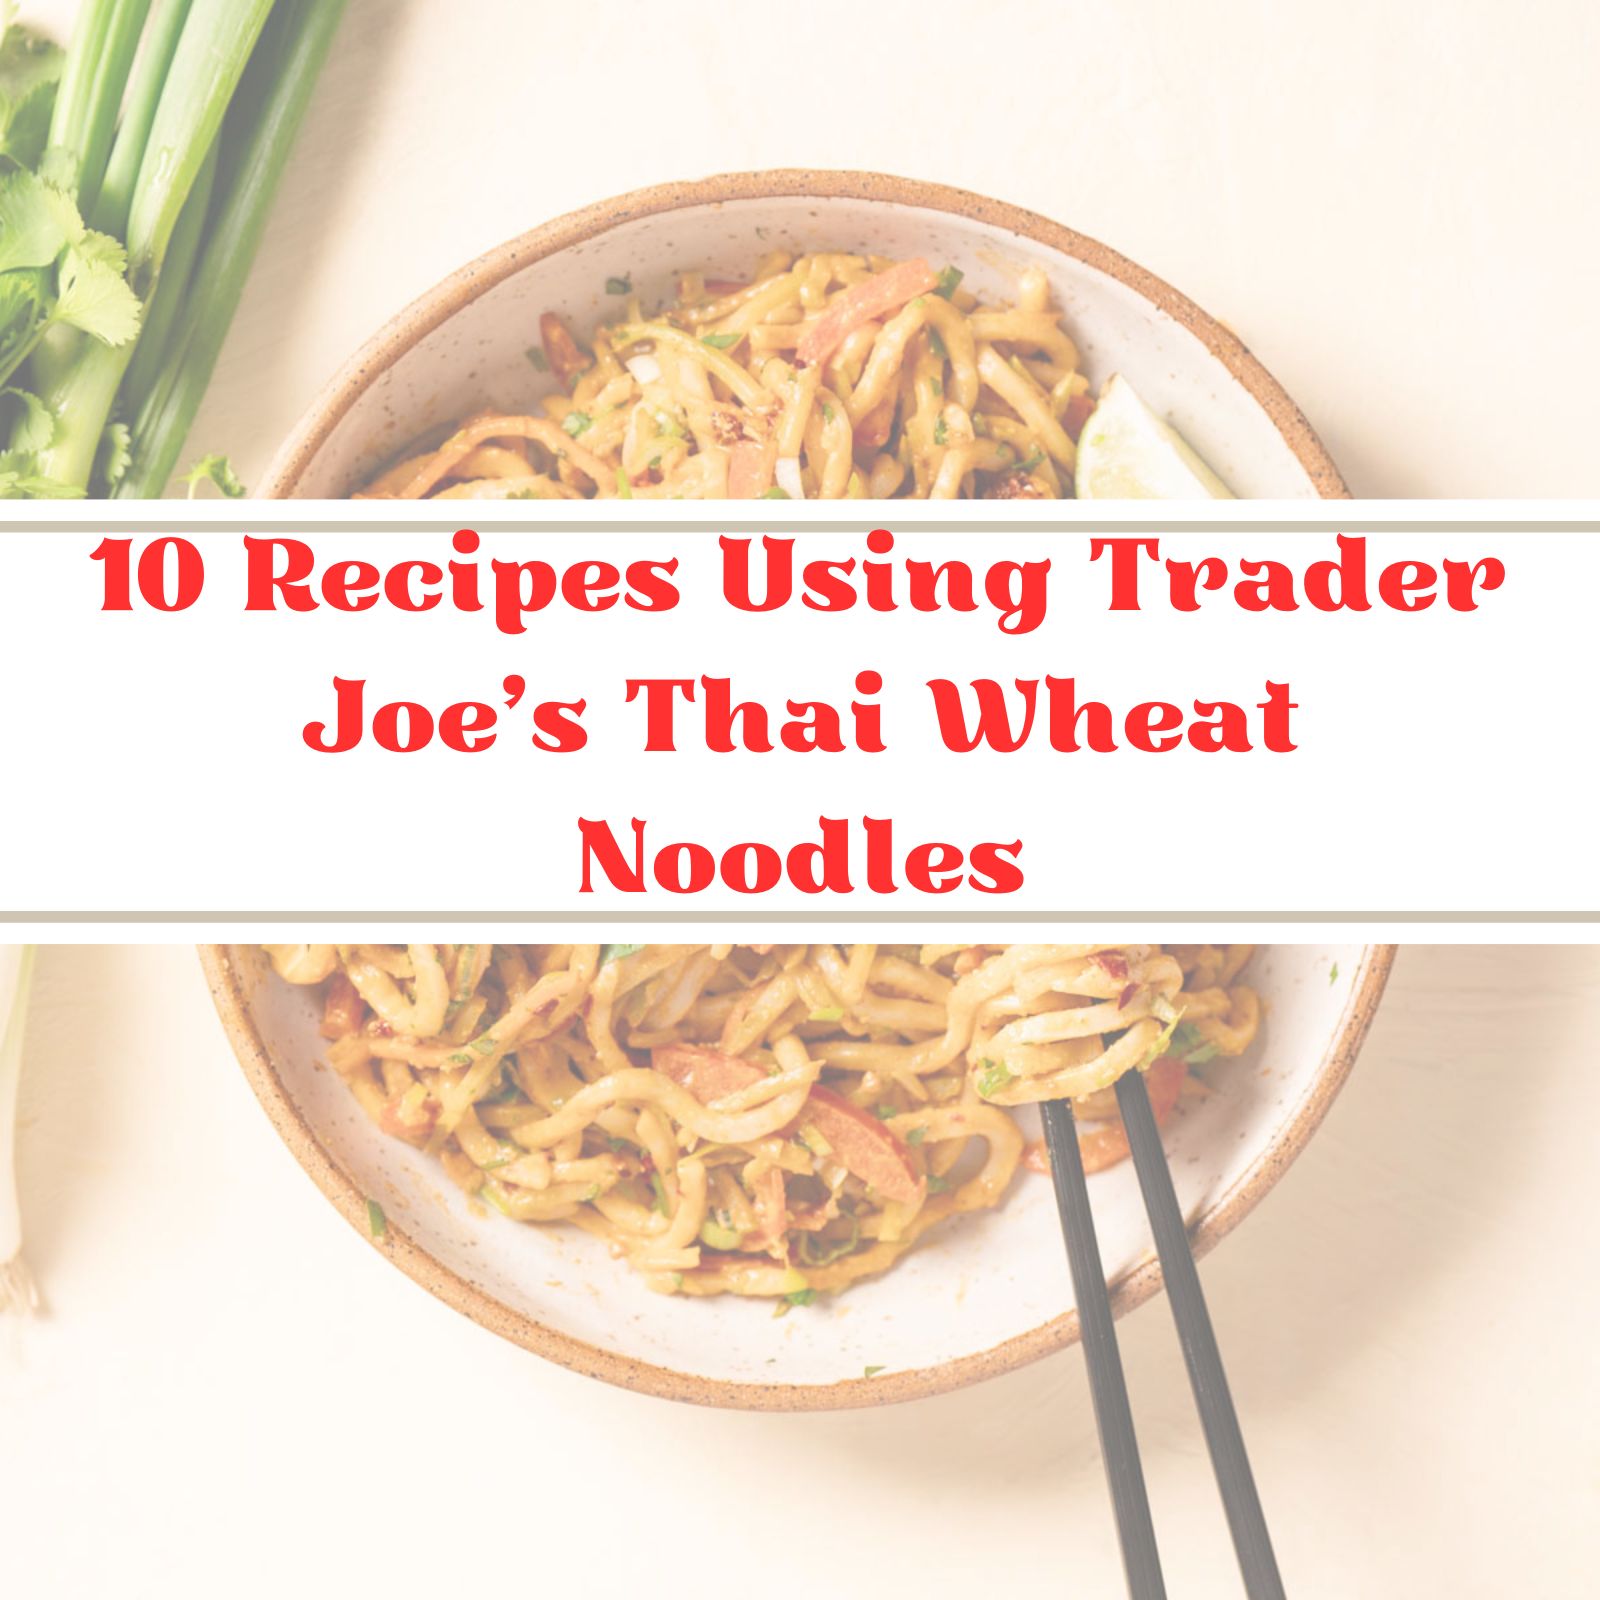 Text overlay over a bowl of noodles saying 1- recipes using trader joe's thai wheat noodles